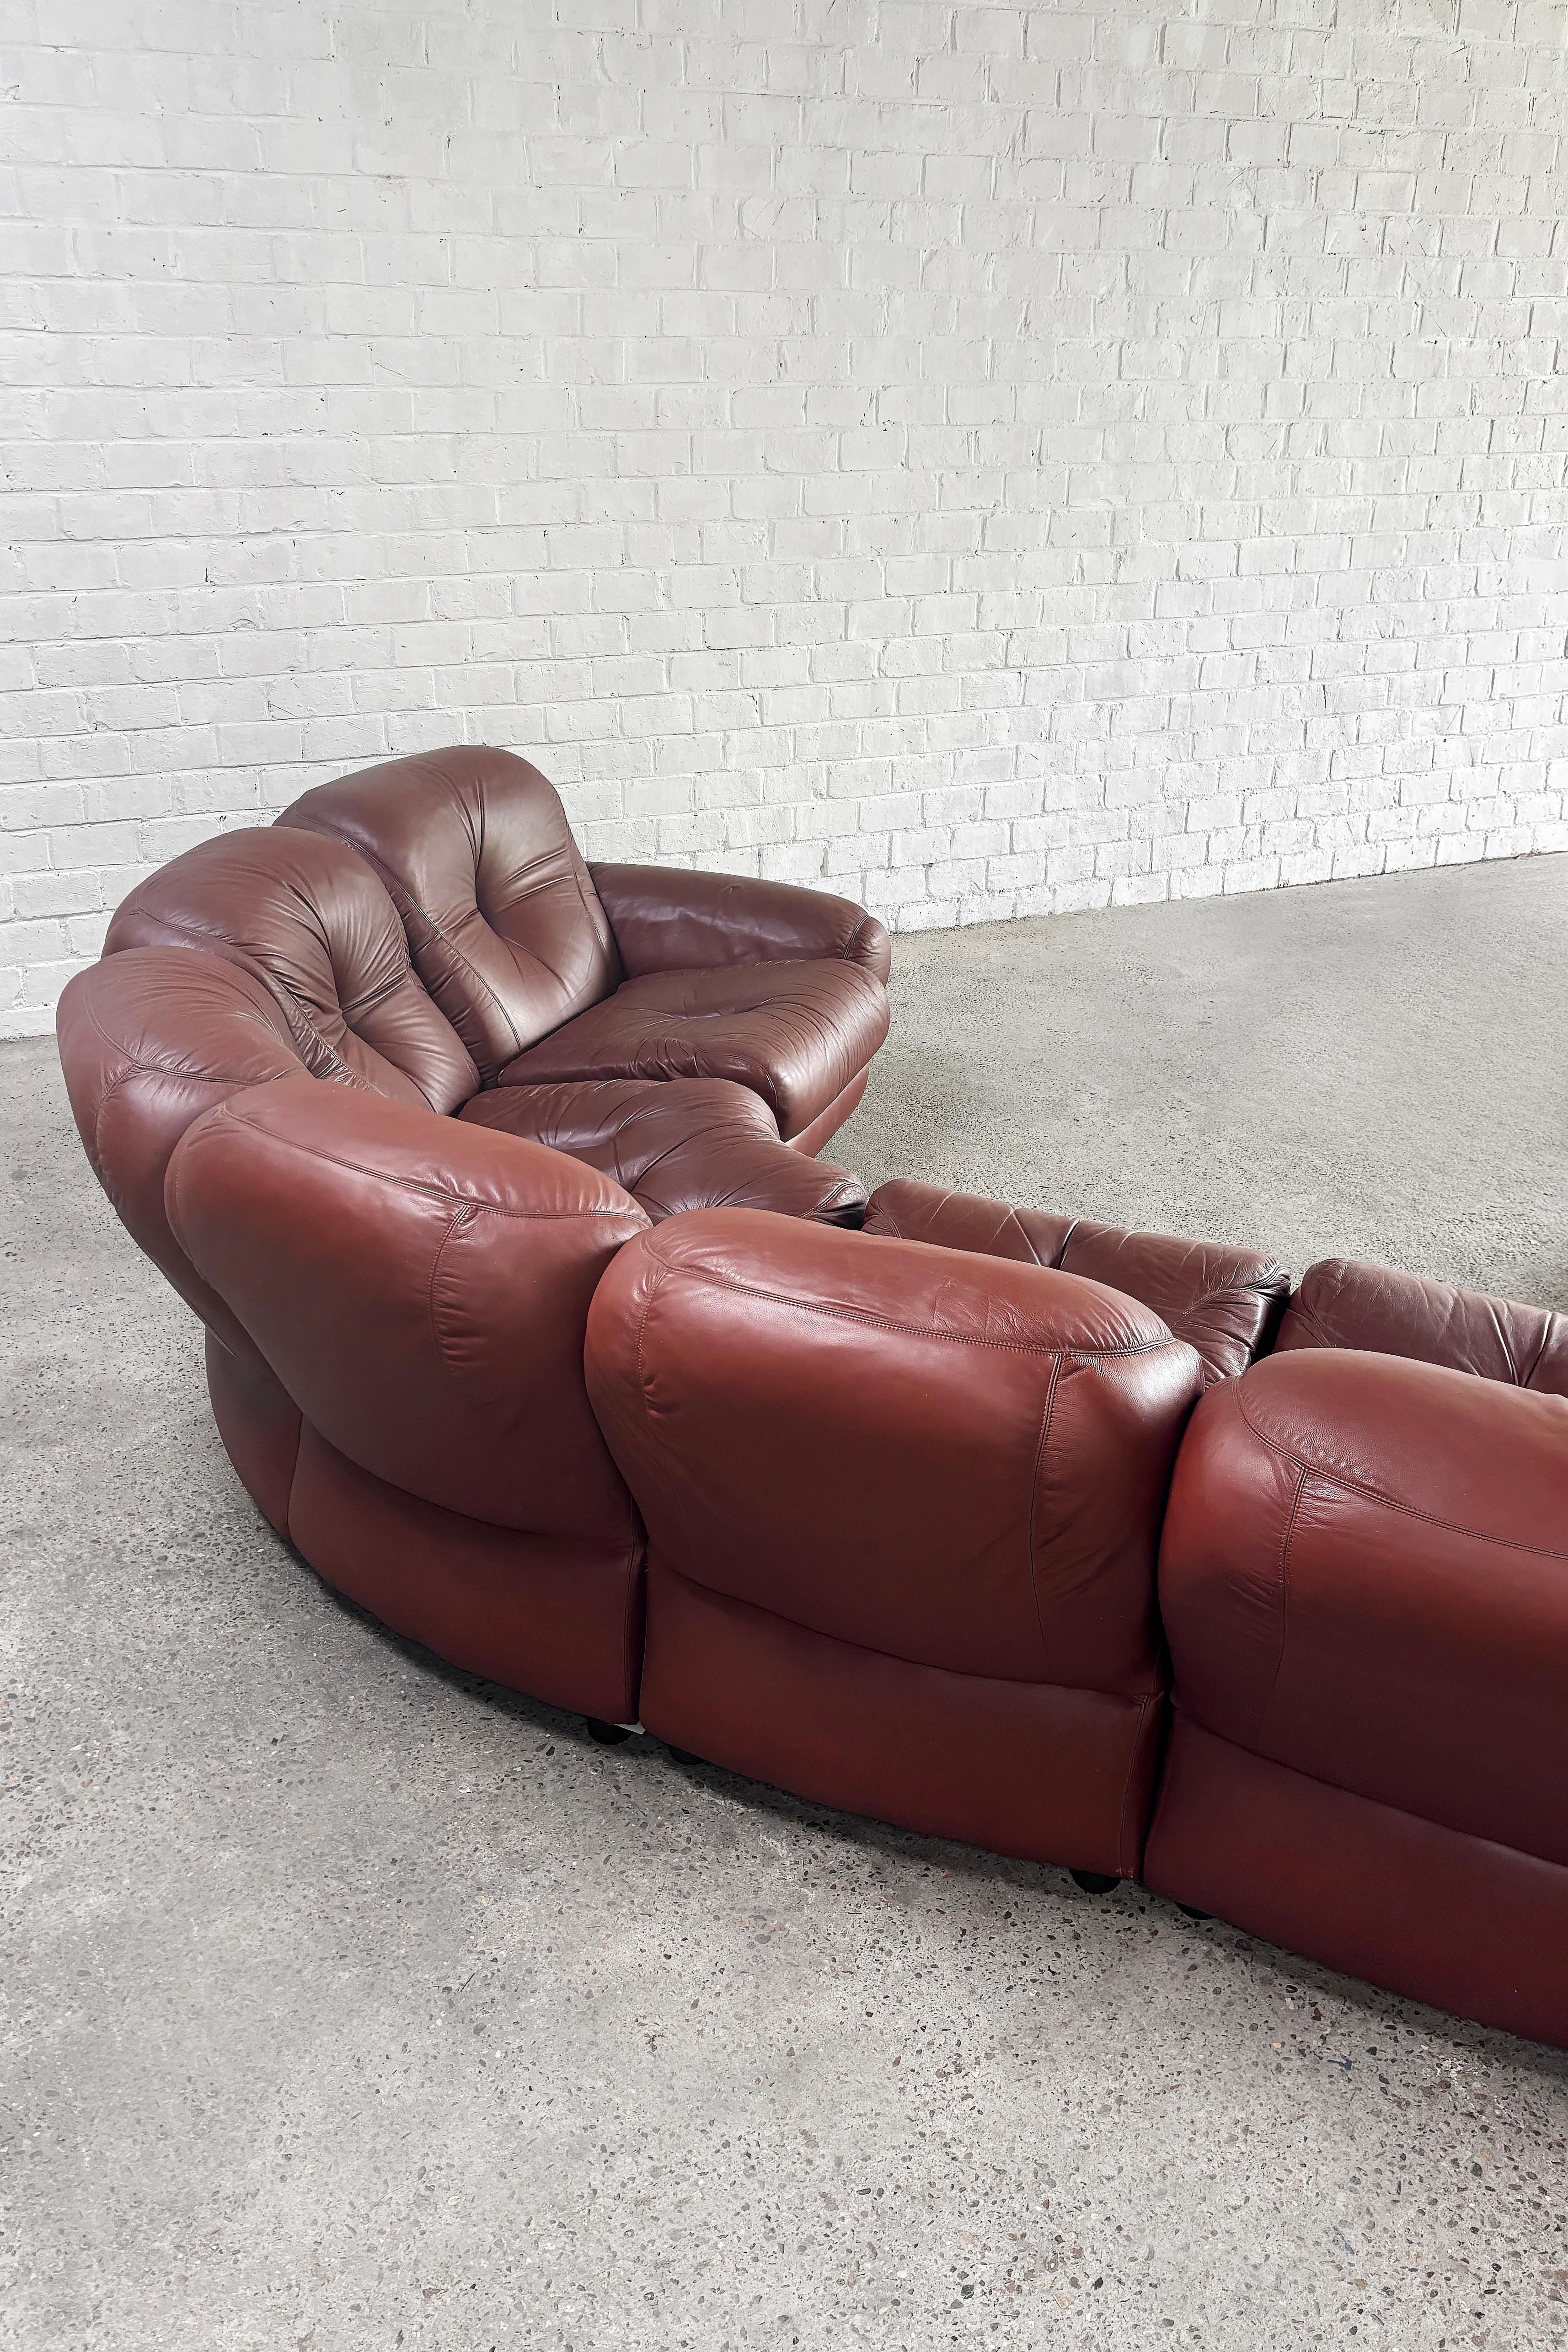 Italian Modular Sofa Set In Cognac Leather Attributed To Mobil Girgi, 1970's For Sale 1